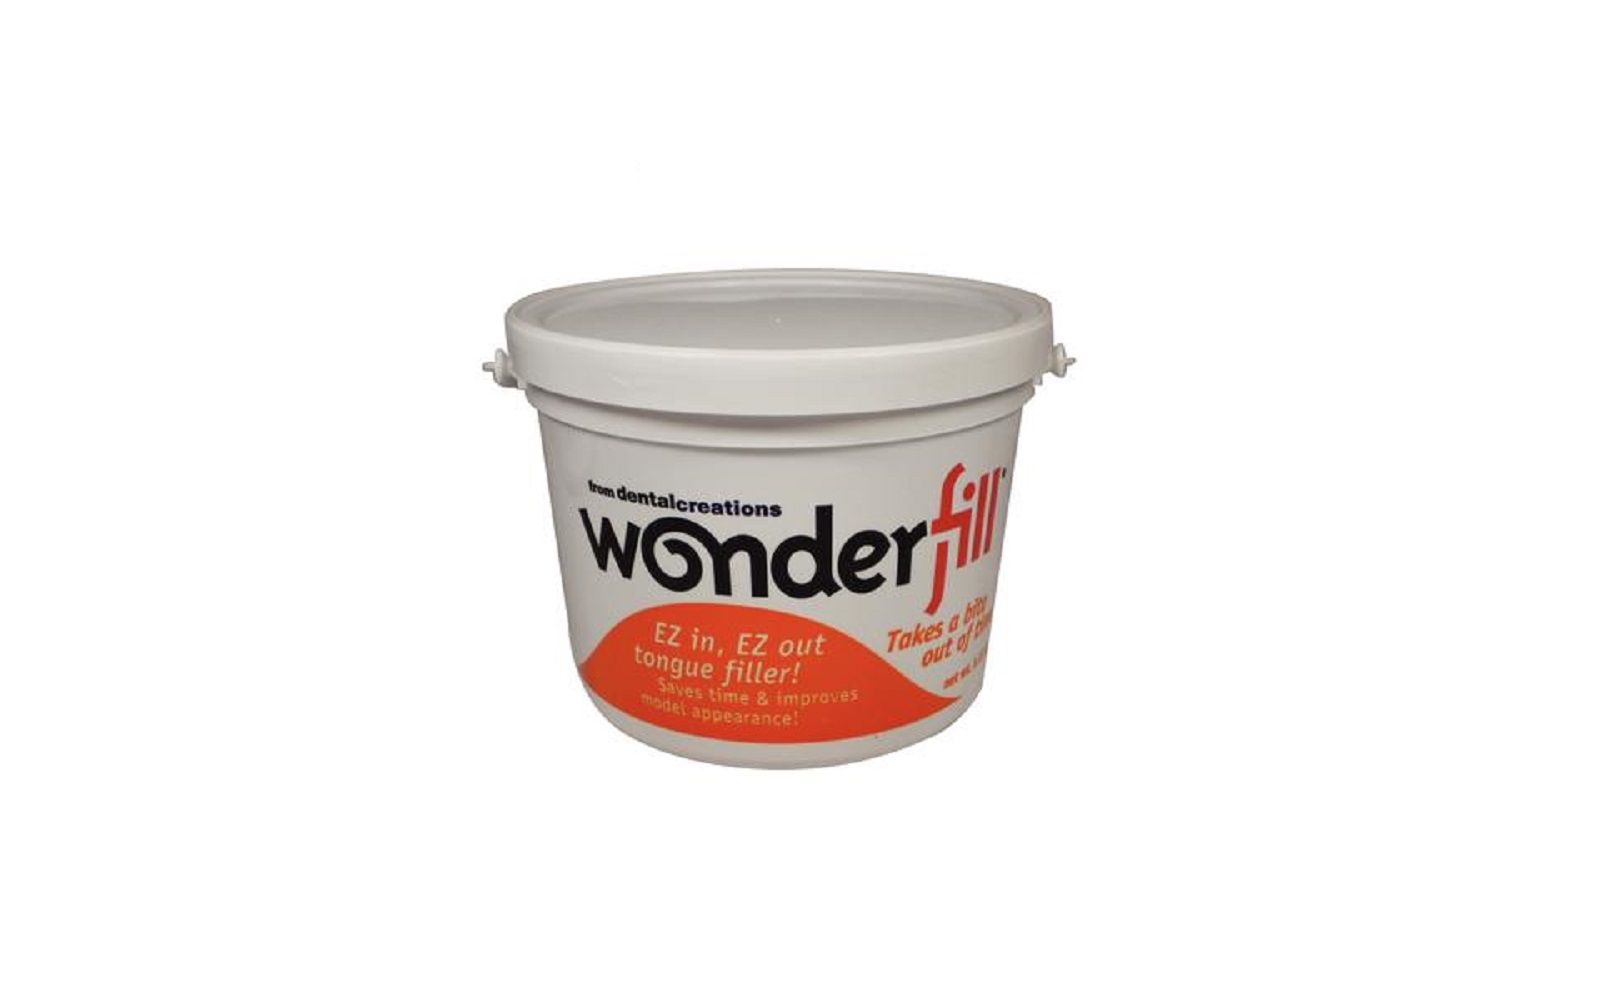 Wonderfill® tongue and void filler, 39 oz tub